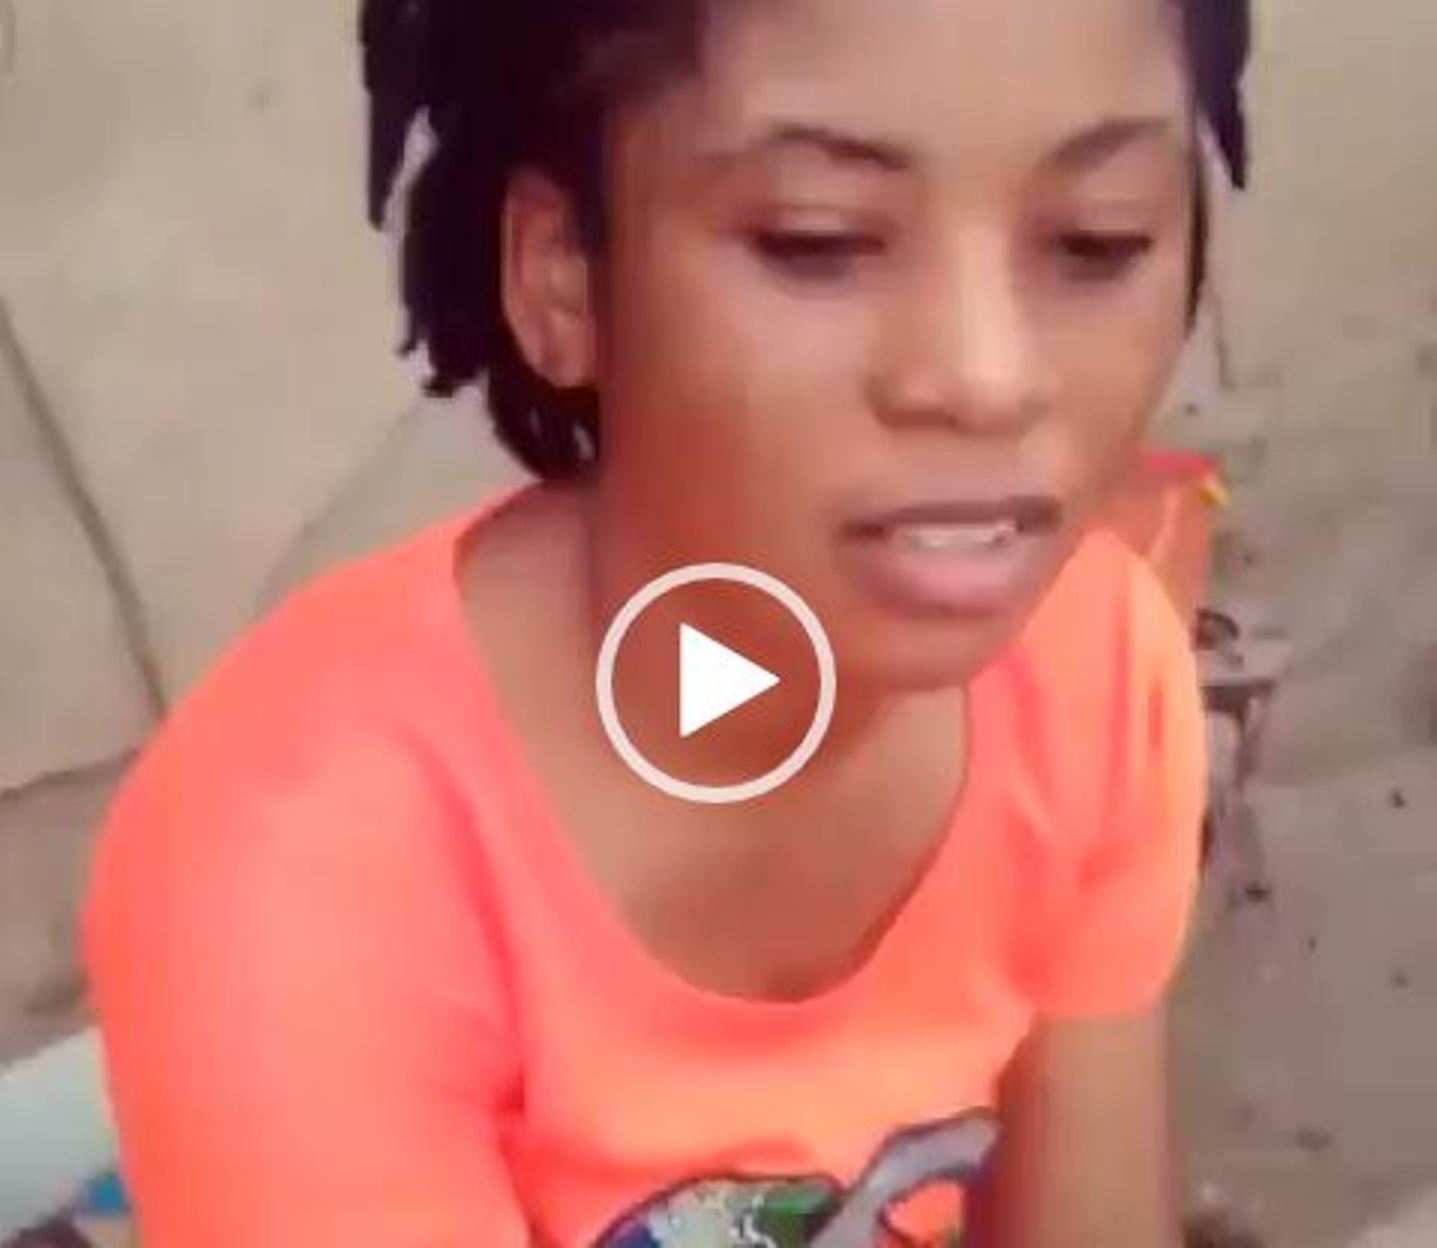 Small Girls Having Sex - My father has been having sex with me for years, daughter cries out